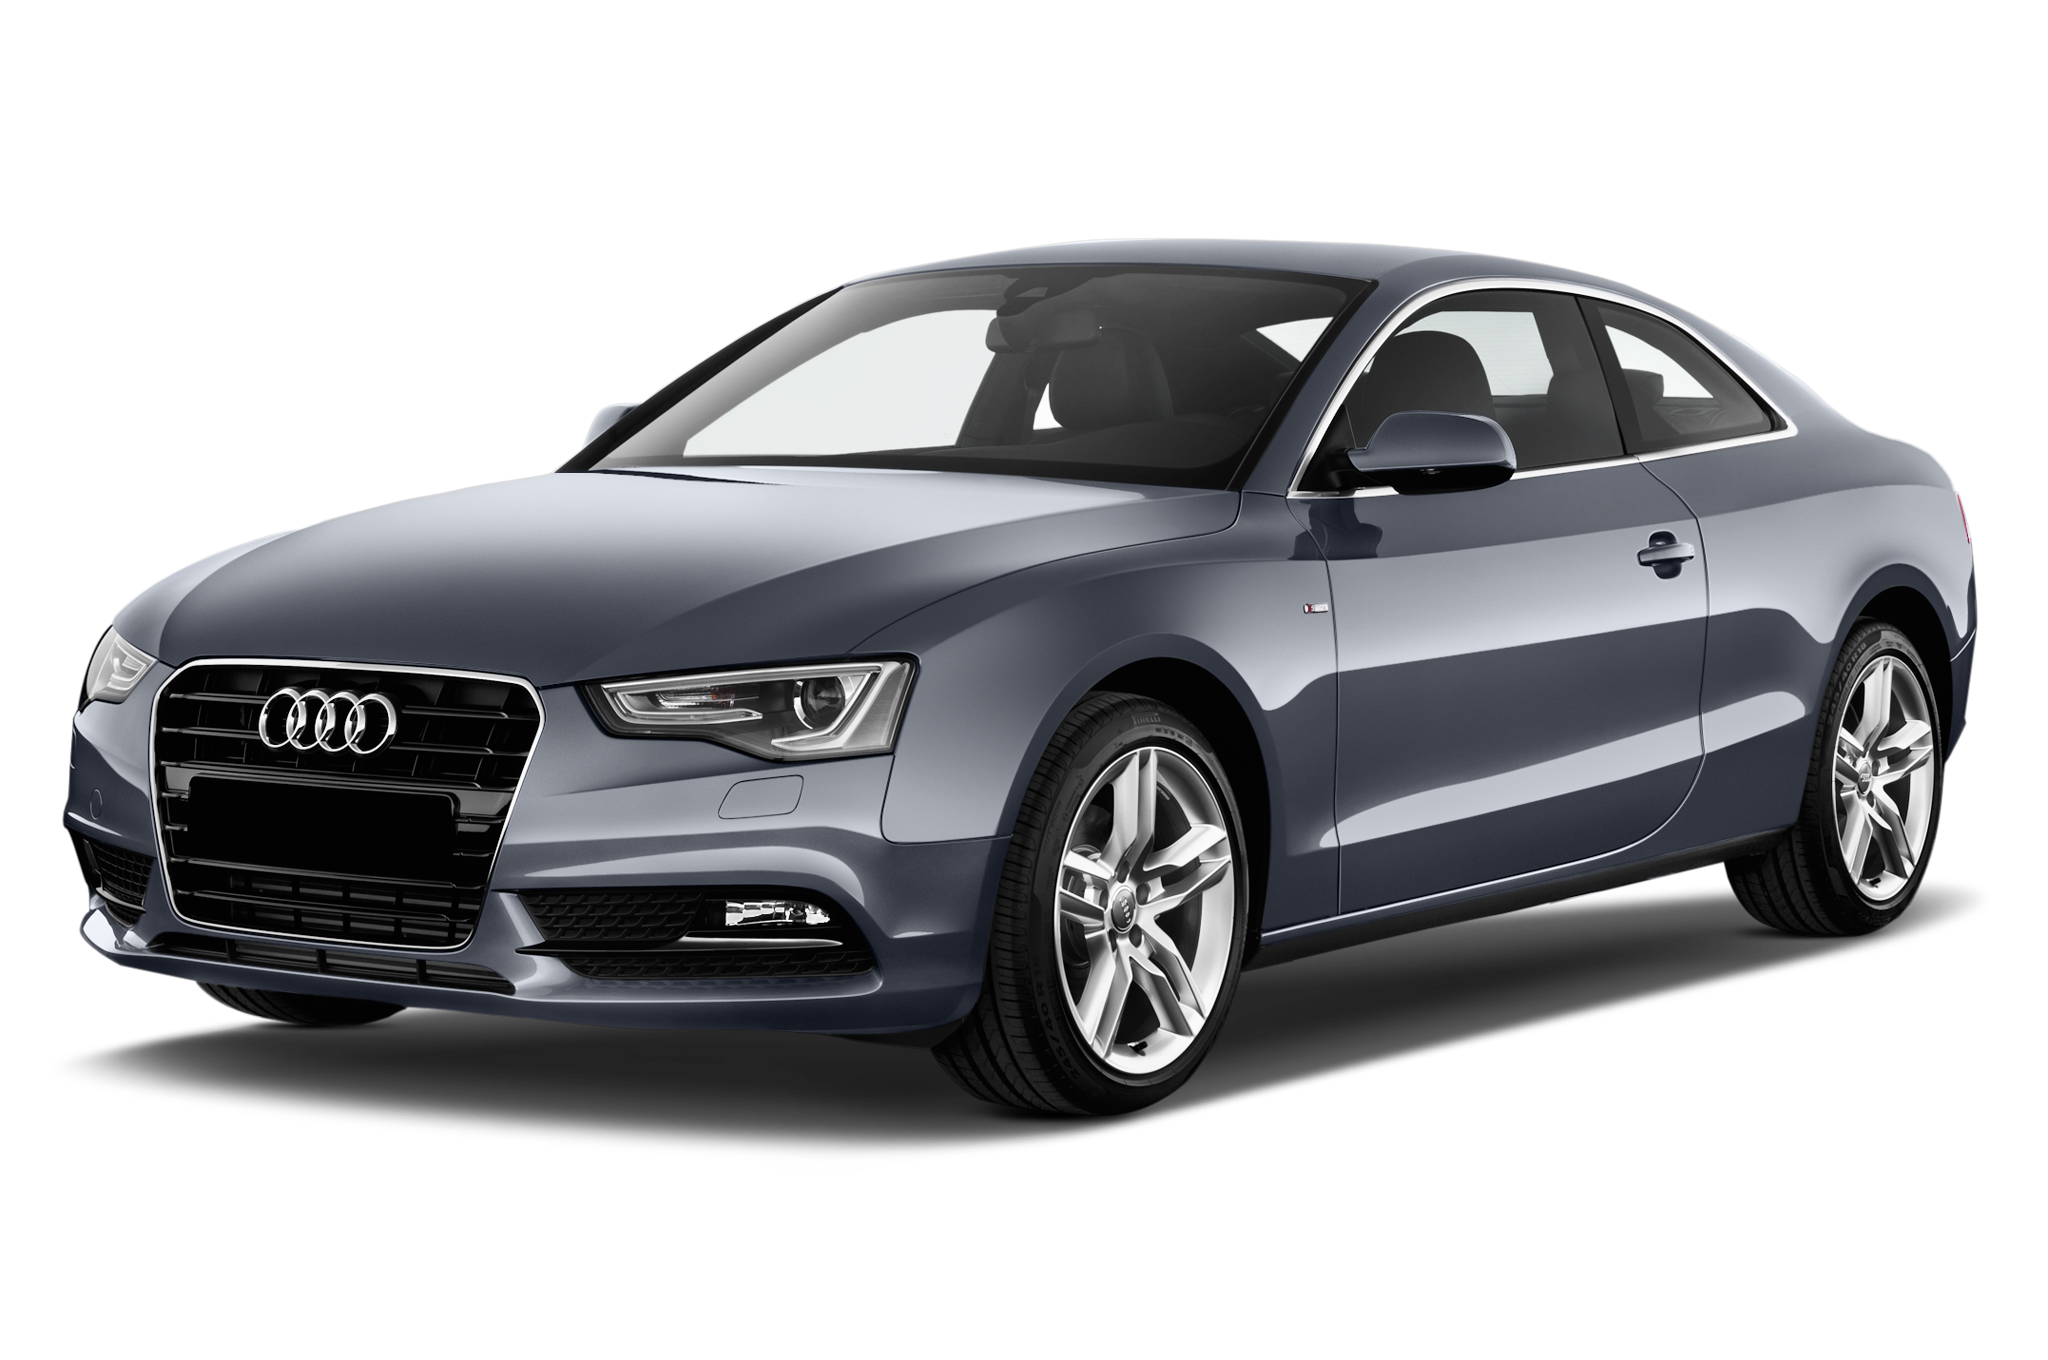 Where Can I Rent A Audi A5 Coupe In Dubai